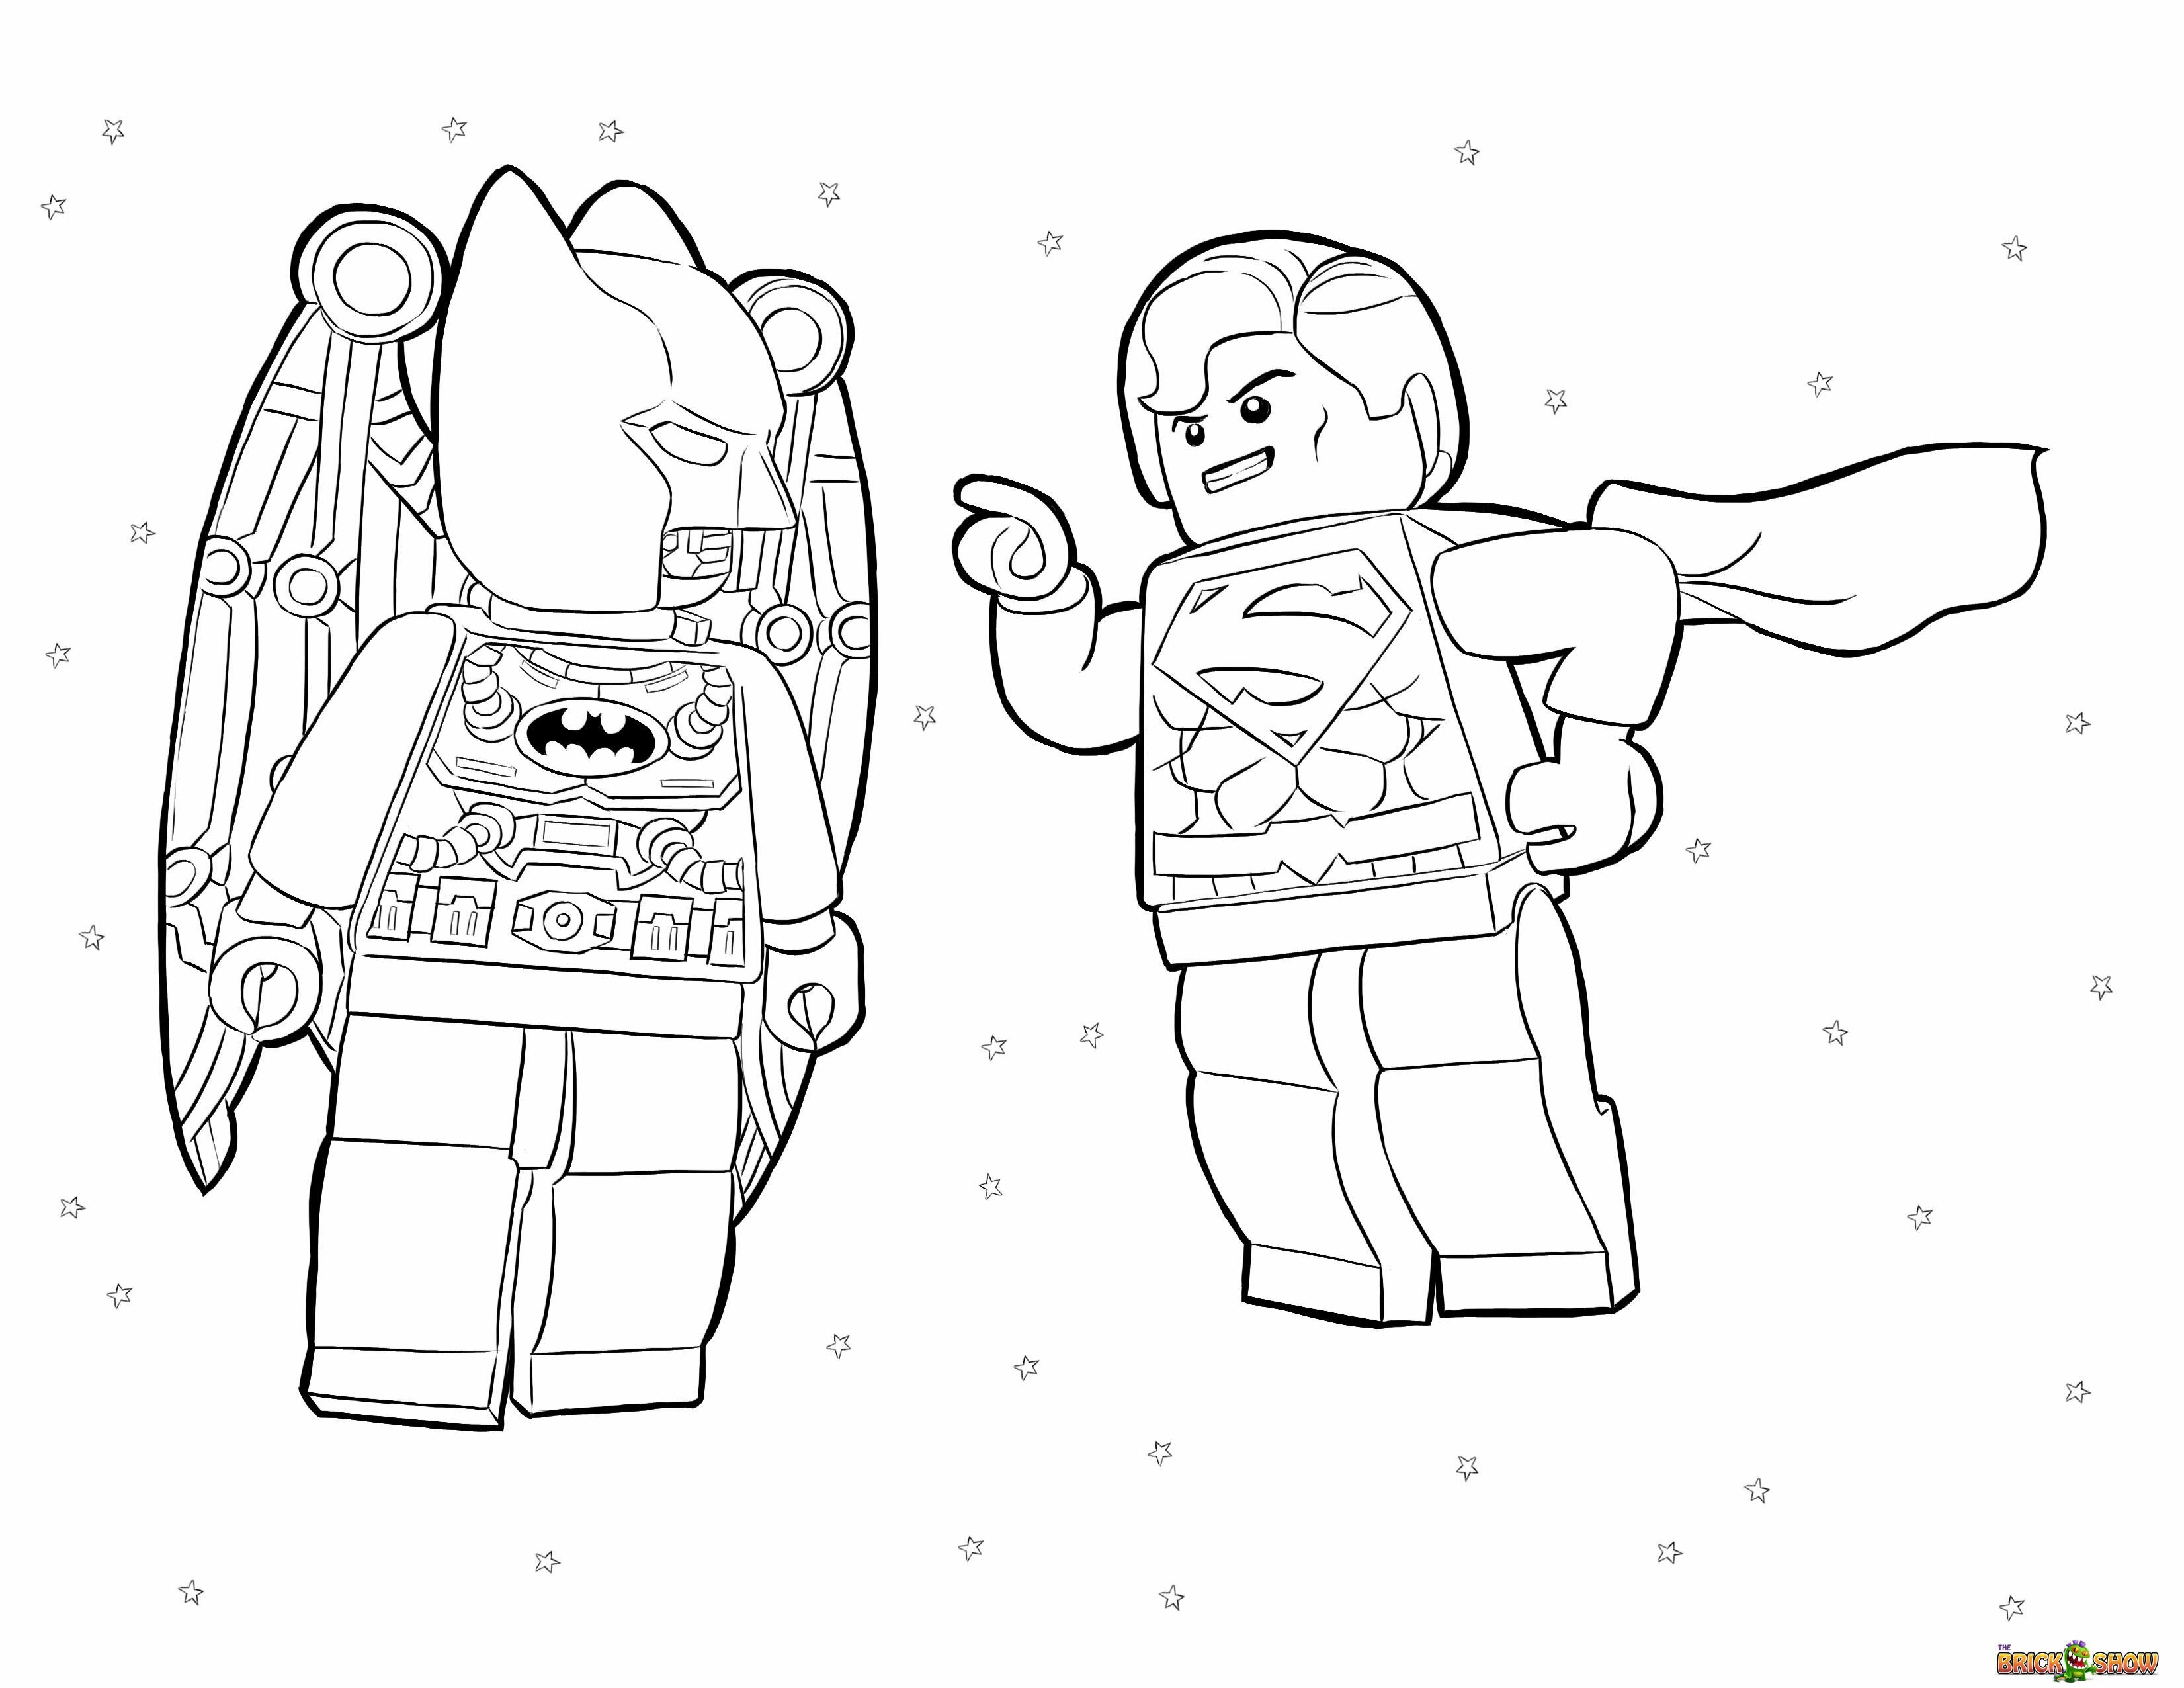 remarkable LEGO Superman and Batman in Space Coloring Page Printable Sheet incredible shape – lego batman and robin coloring page